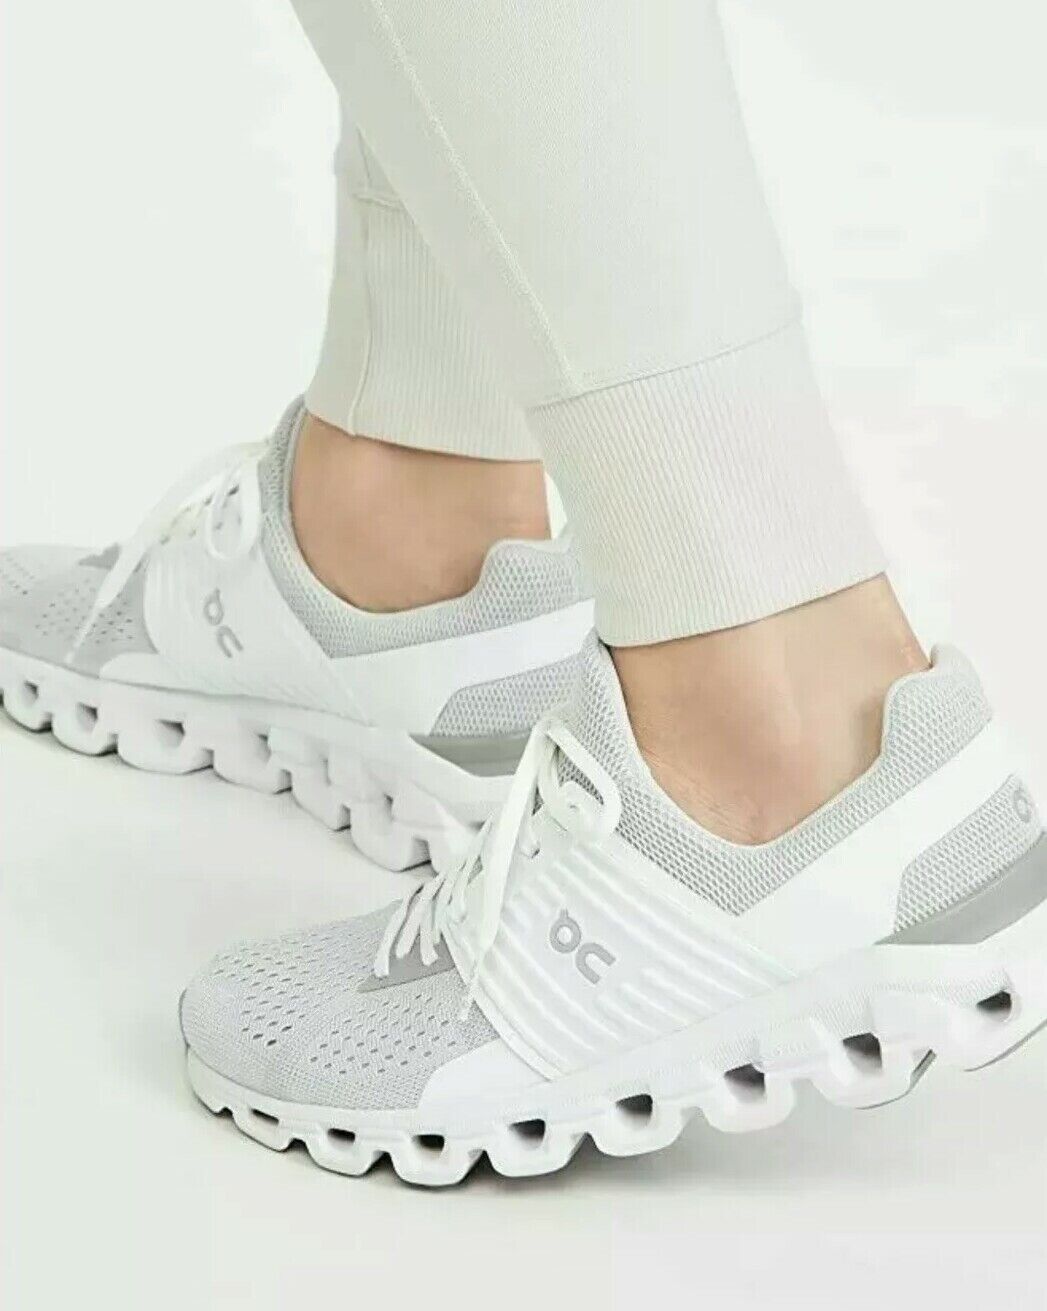 Take a Look at the On Cloud Shoes on eBay | eBay